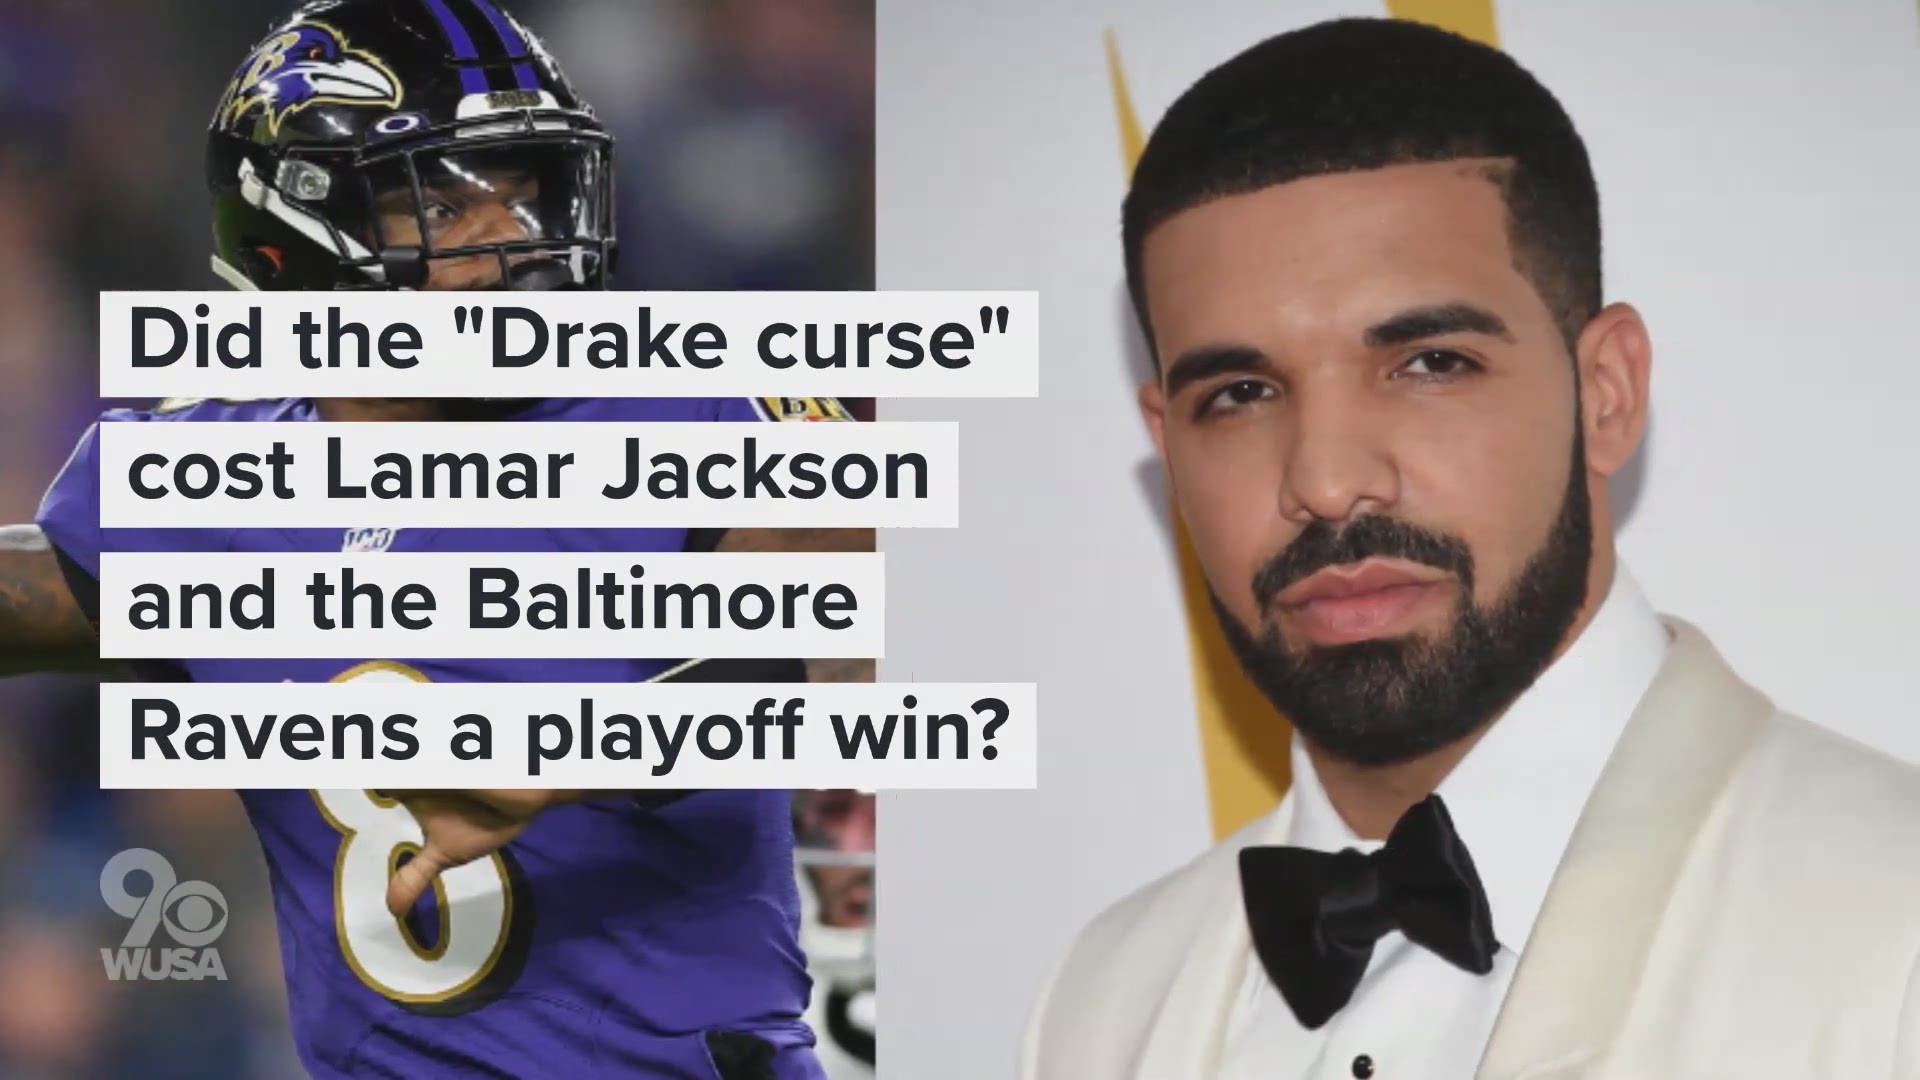 The Drake curse made its way back on social media with many on Twitter saying his well-wishes to Lamar Jackson may have cost the Baltimore Ravens a playoff win.